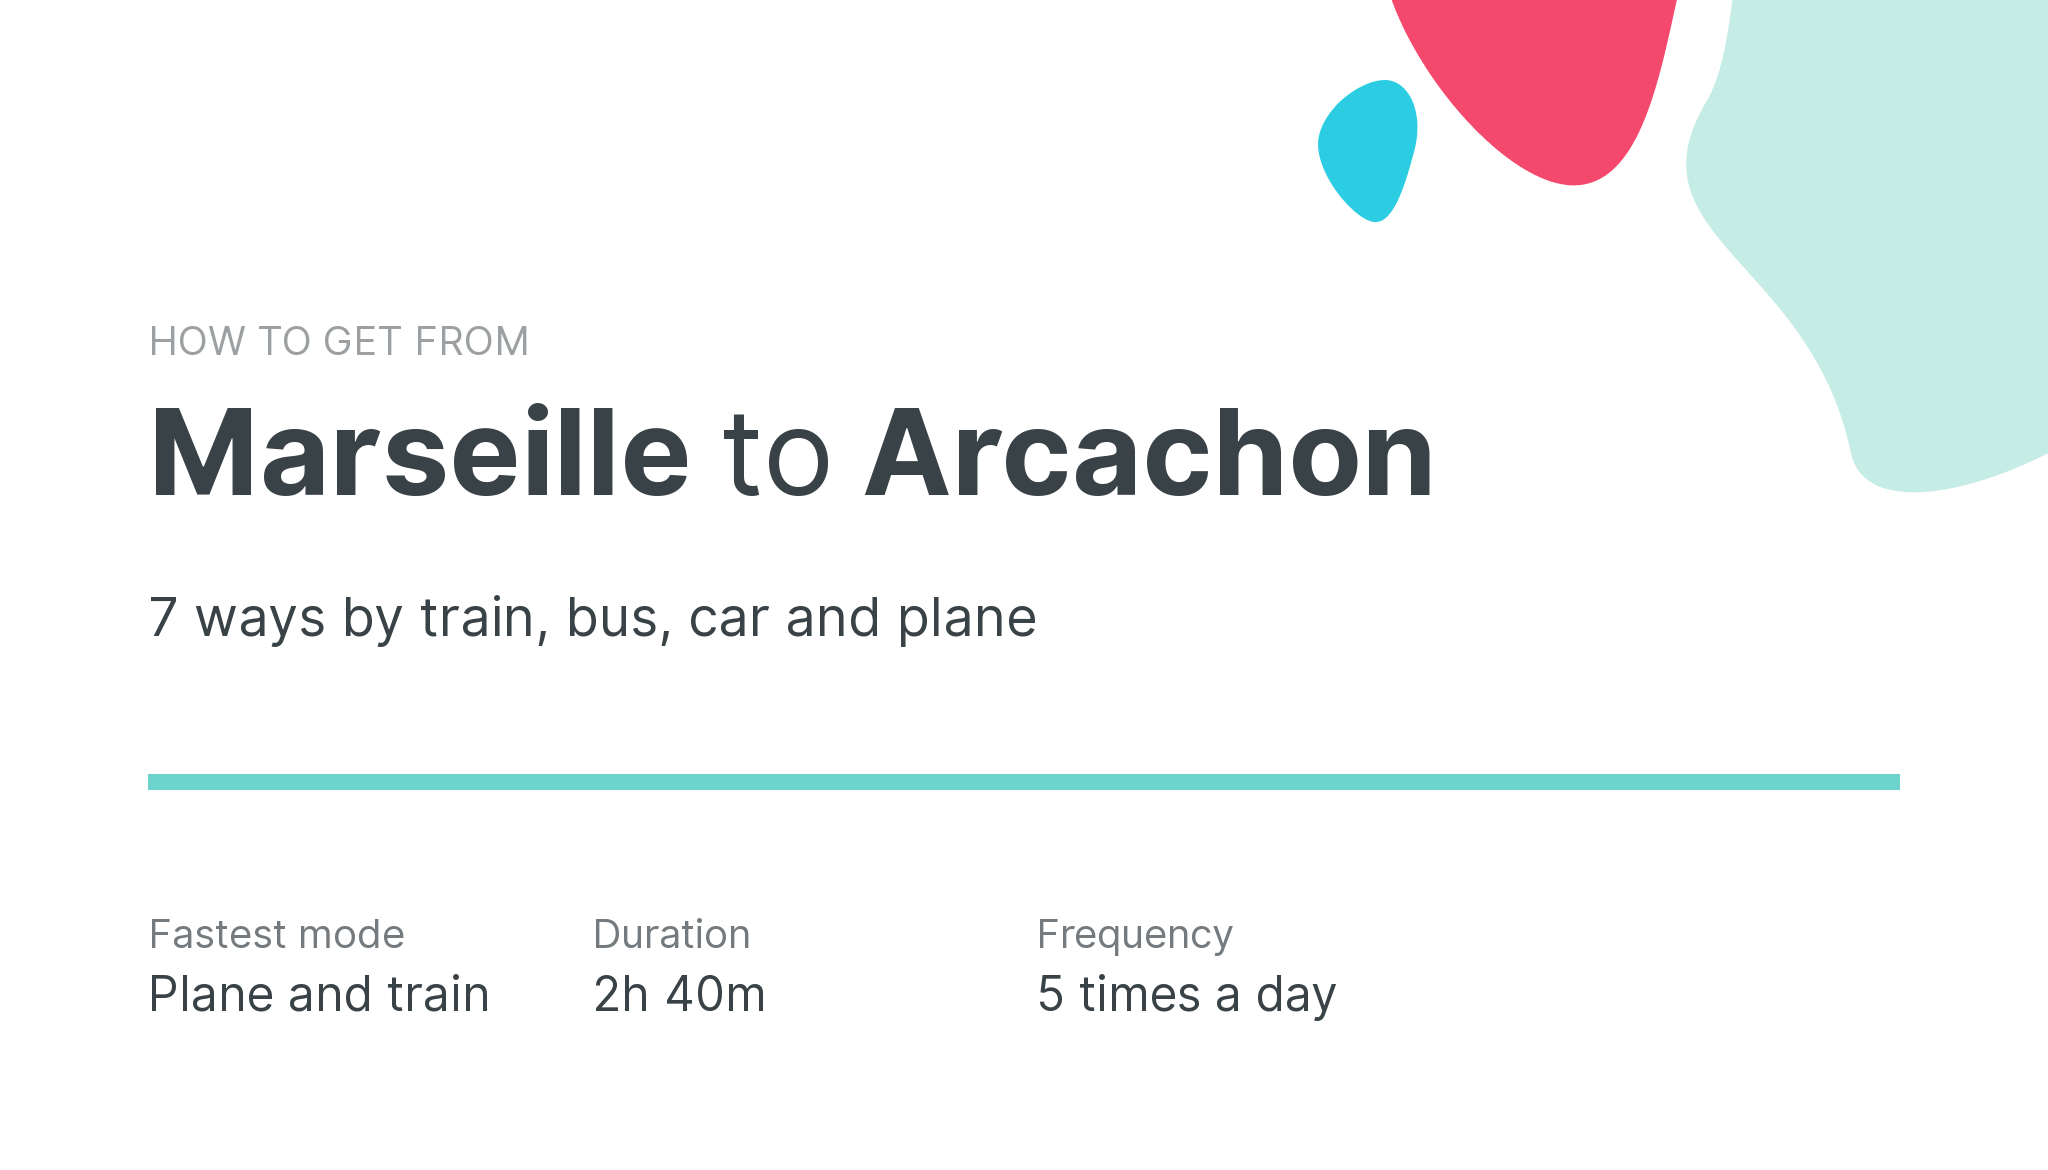 How do I get from Marseille to Arcachon